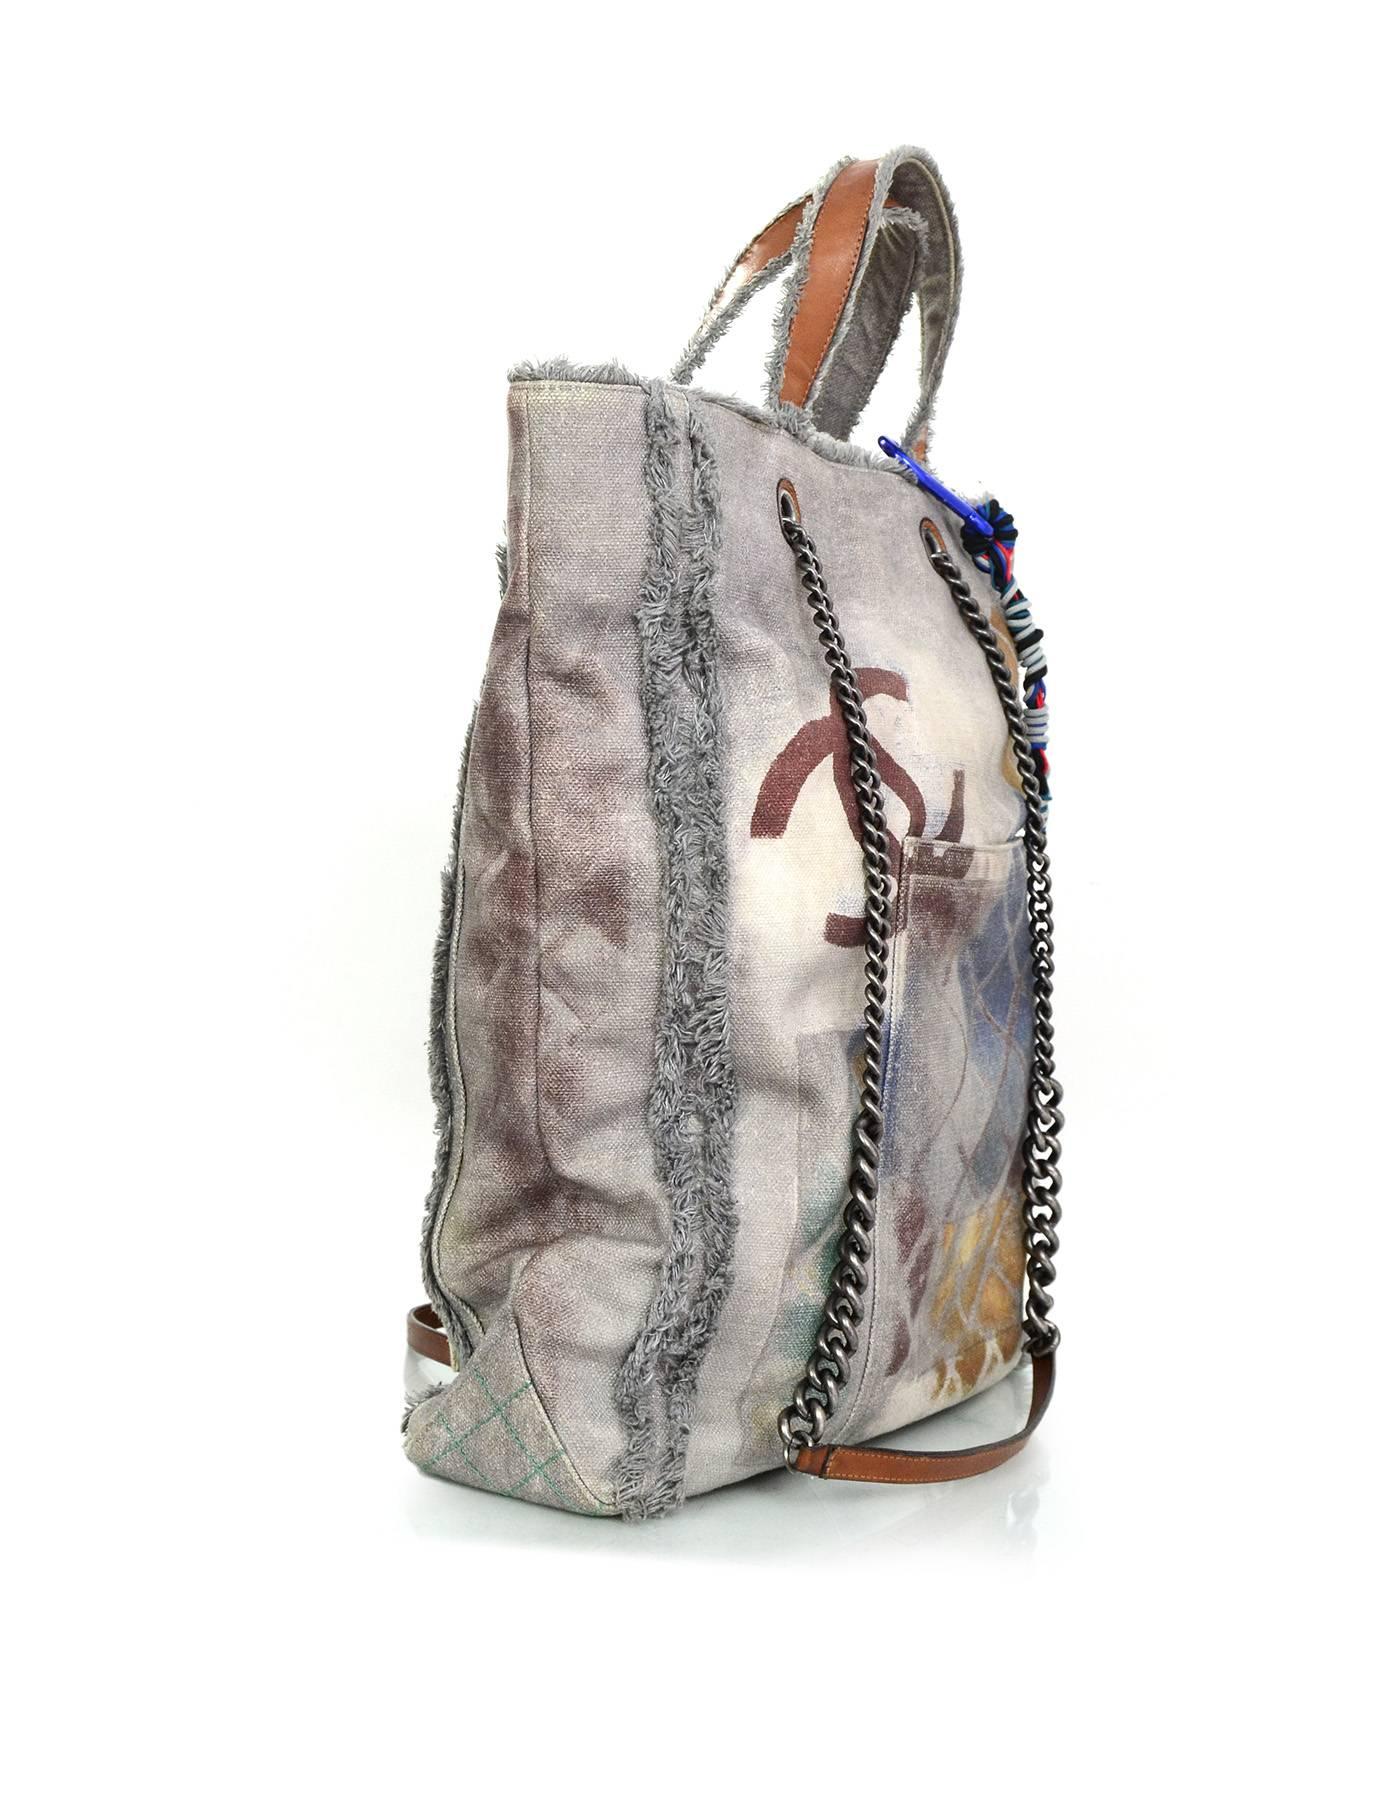 Chanel Grey Canvas Printed Graffiti Tote 
Features different text printed throughout and nylon twisted bag charm

Made In: Italy
Year of Production: 2014
Color: Grey and multi-colored
Hardware: Oxidized silvertone
Materials: Leather and